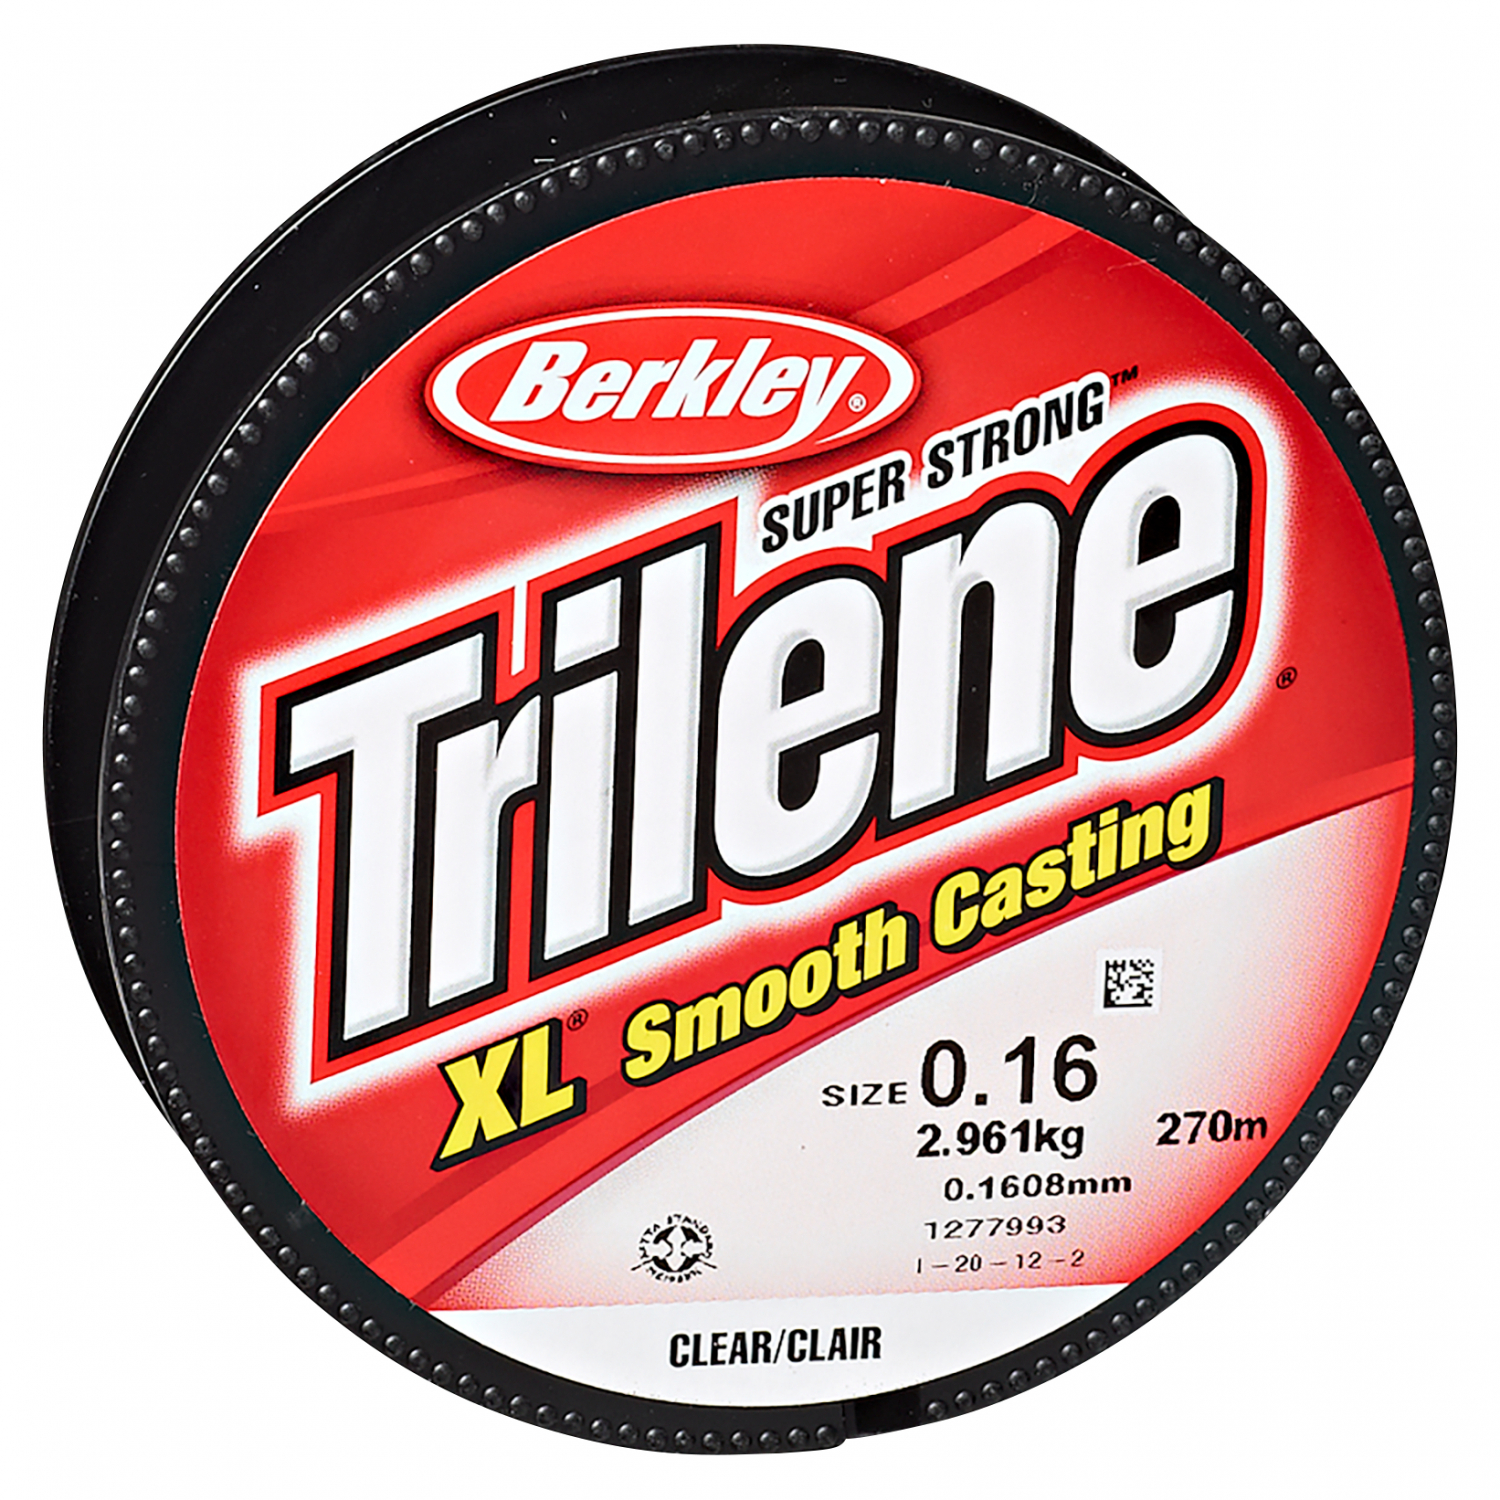 Berkley Casting Fishing Line Trilene XL Smooth (clear) at low prices